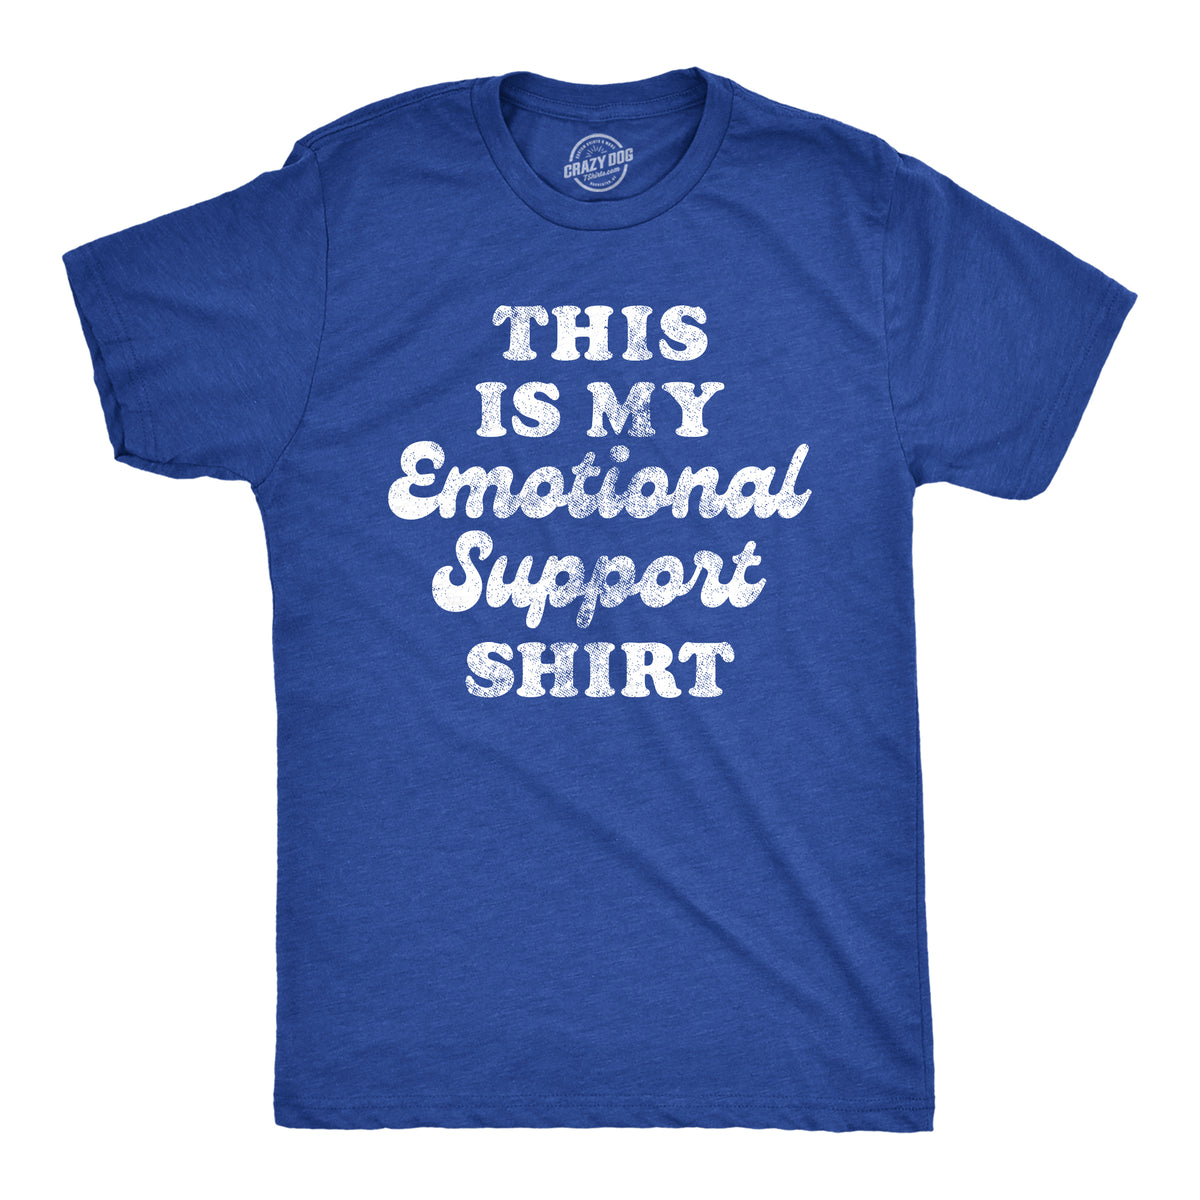 Funny Heather Royal - SHIRT This Is My Emotional Support Shirt Mens T Shirt Nerdy sarcastic Tee